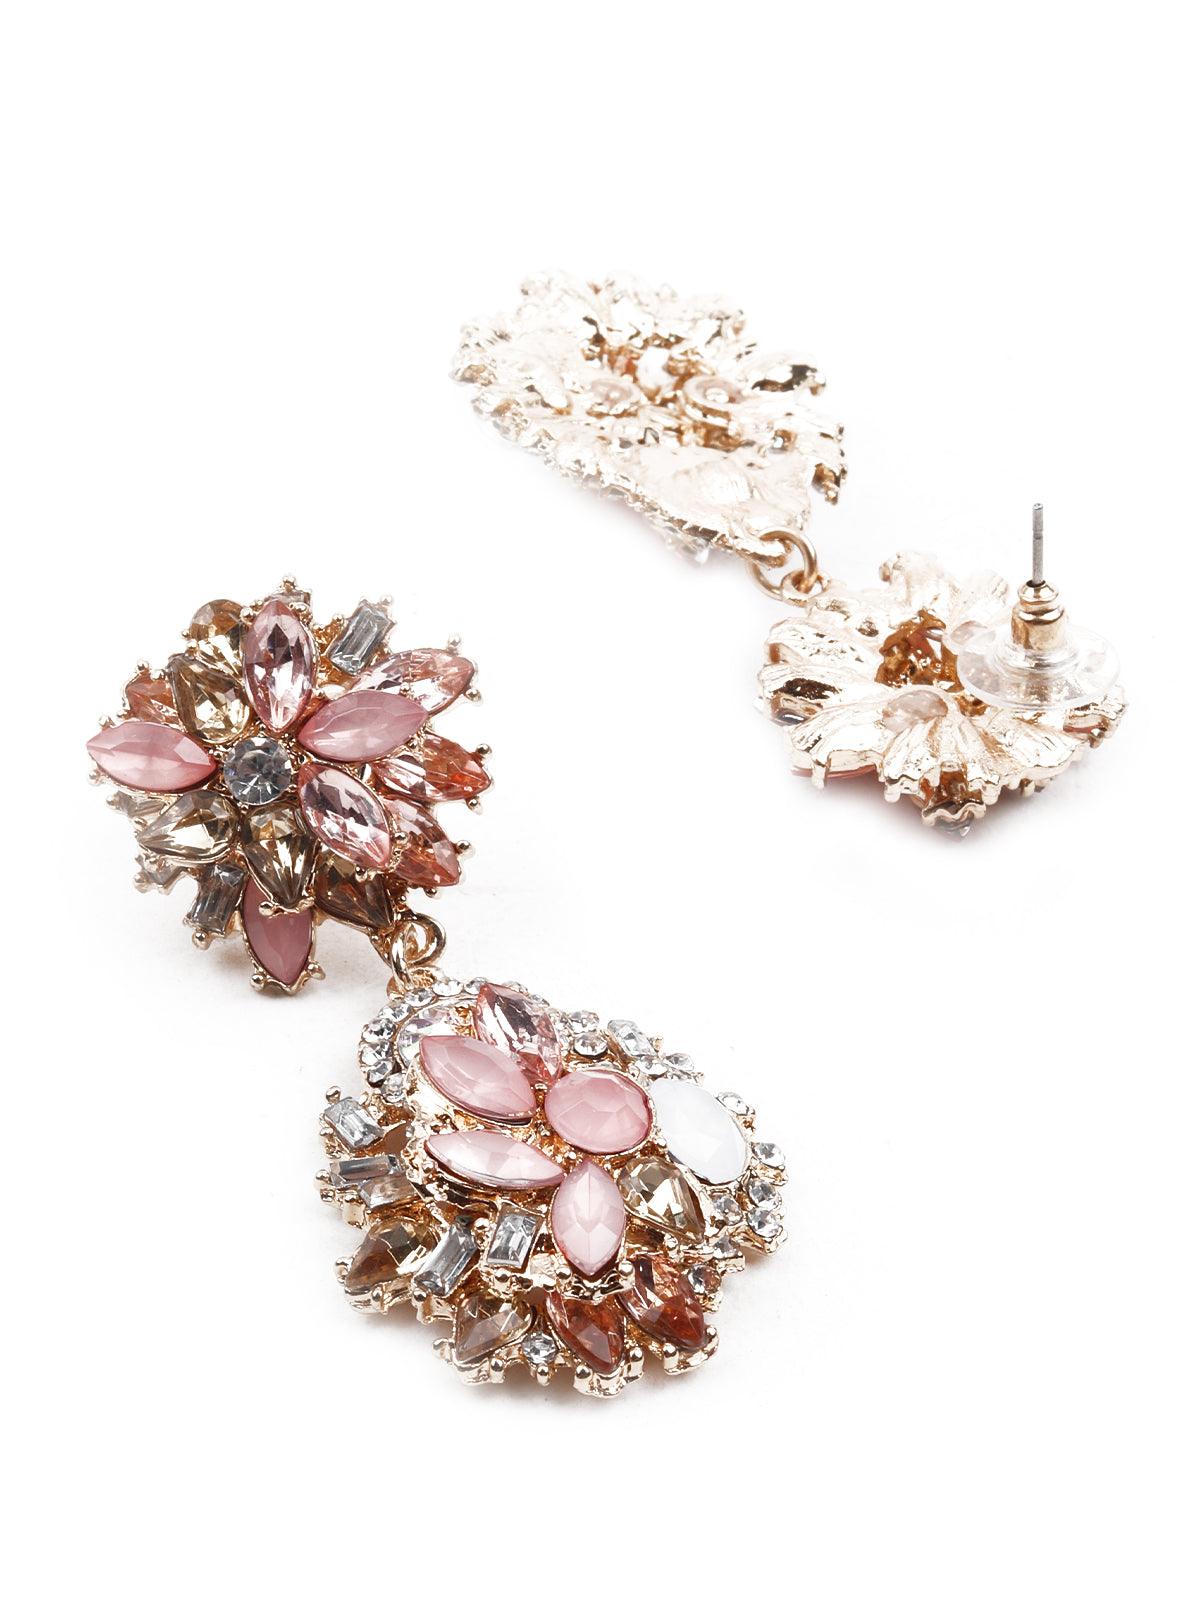 Women's Delicate White And Pink Metal Earrings - Odette